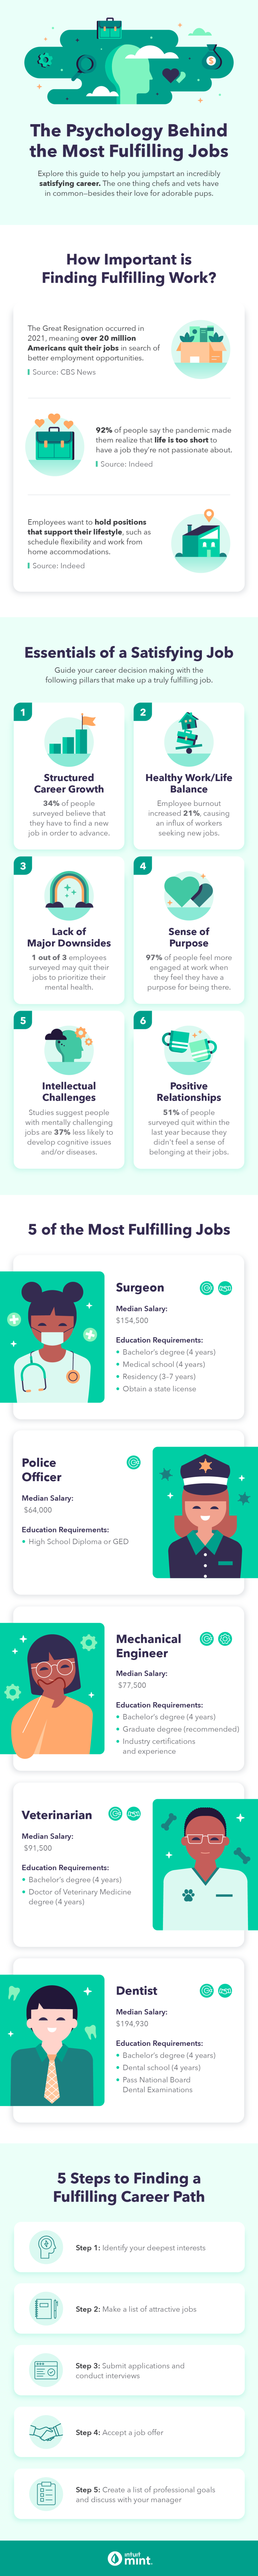 The Psychology Behind the Most Fulfilling Jobs